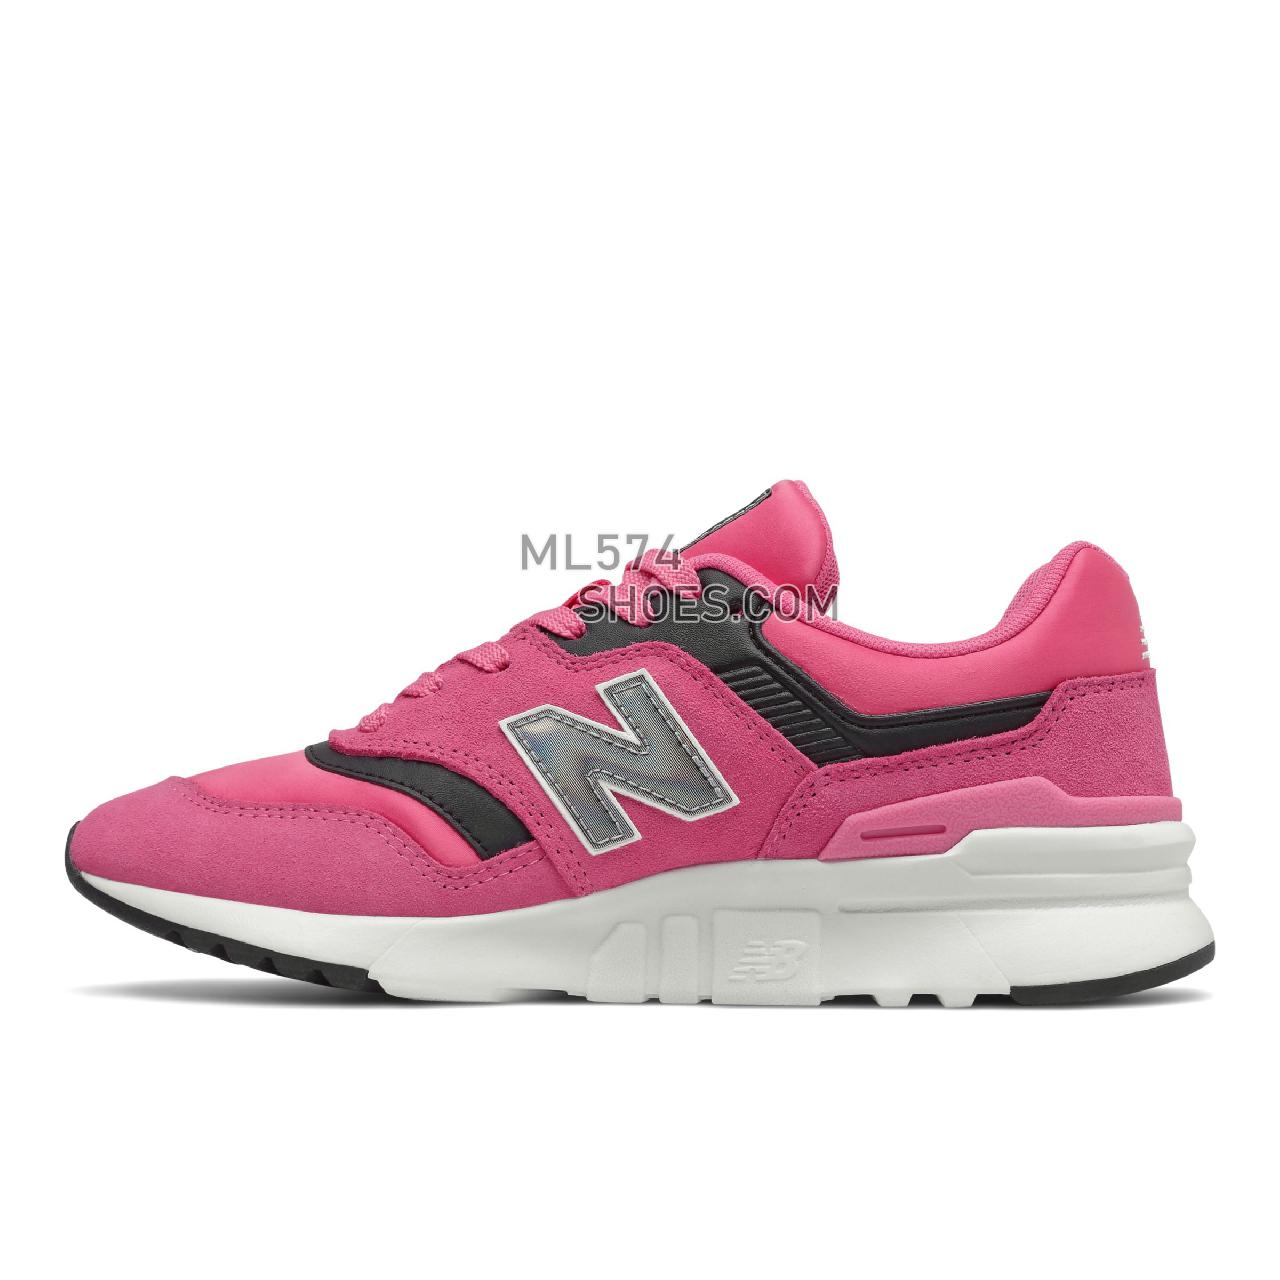 New Balance 997H - Women's Classic Sneakers - Sporty Pink with Black - CW997HLL